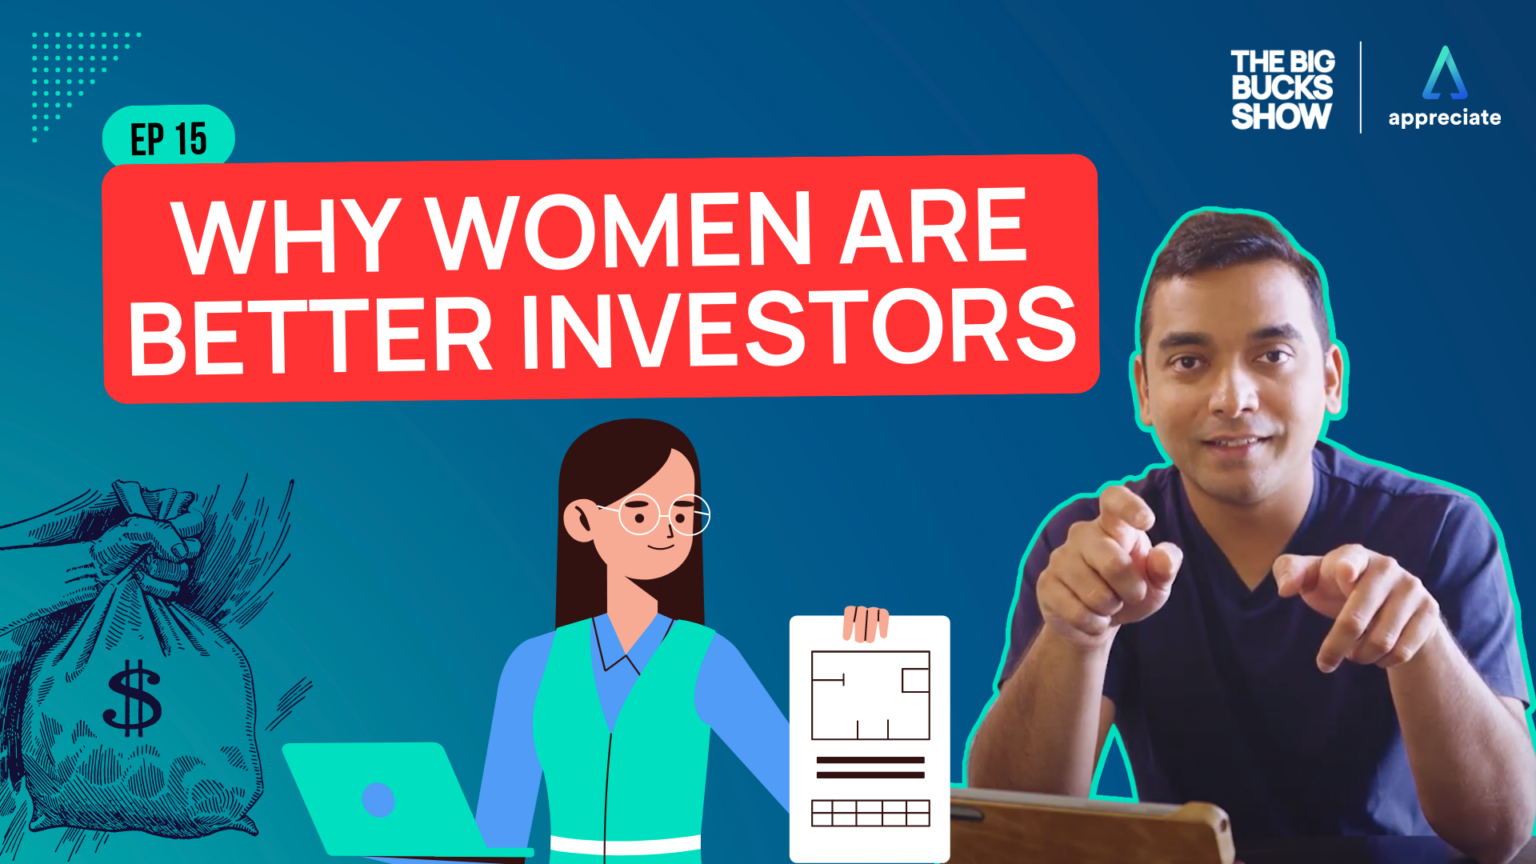 Episode 15 - Thumbnail. Why women are better investors.